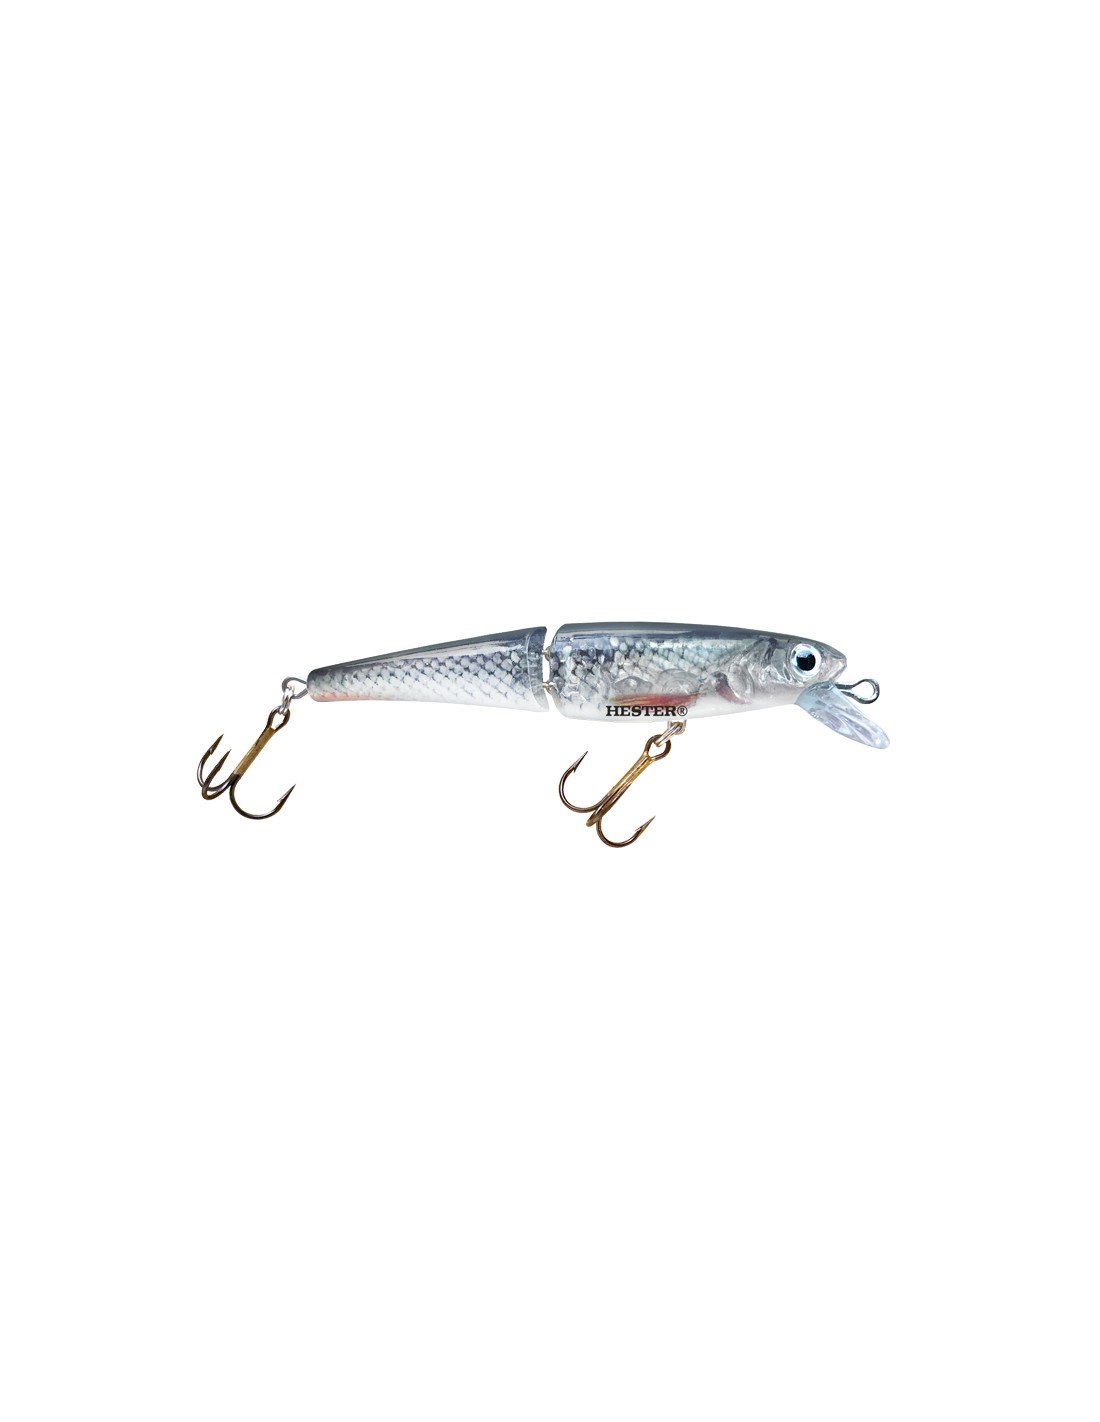 70mm 10g 0.3-0.5m jointed trout minnow 53430